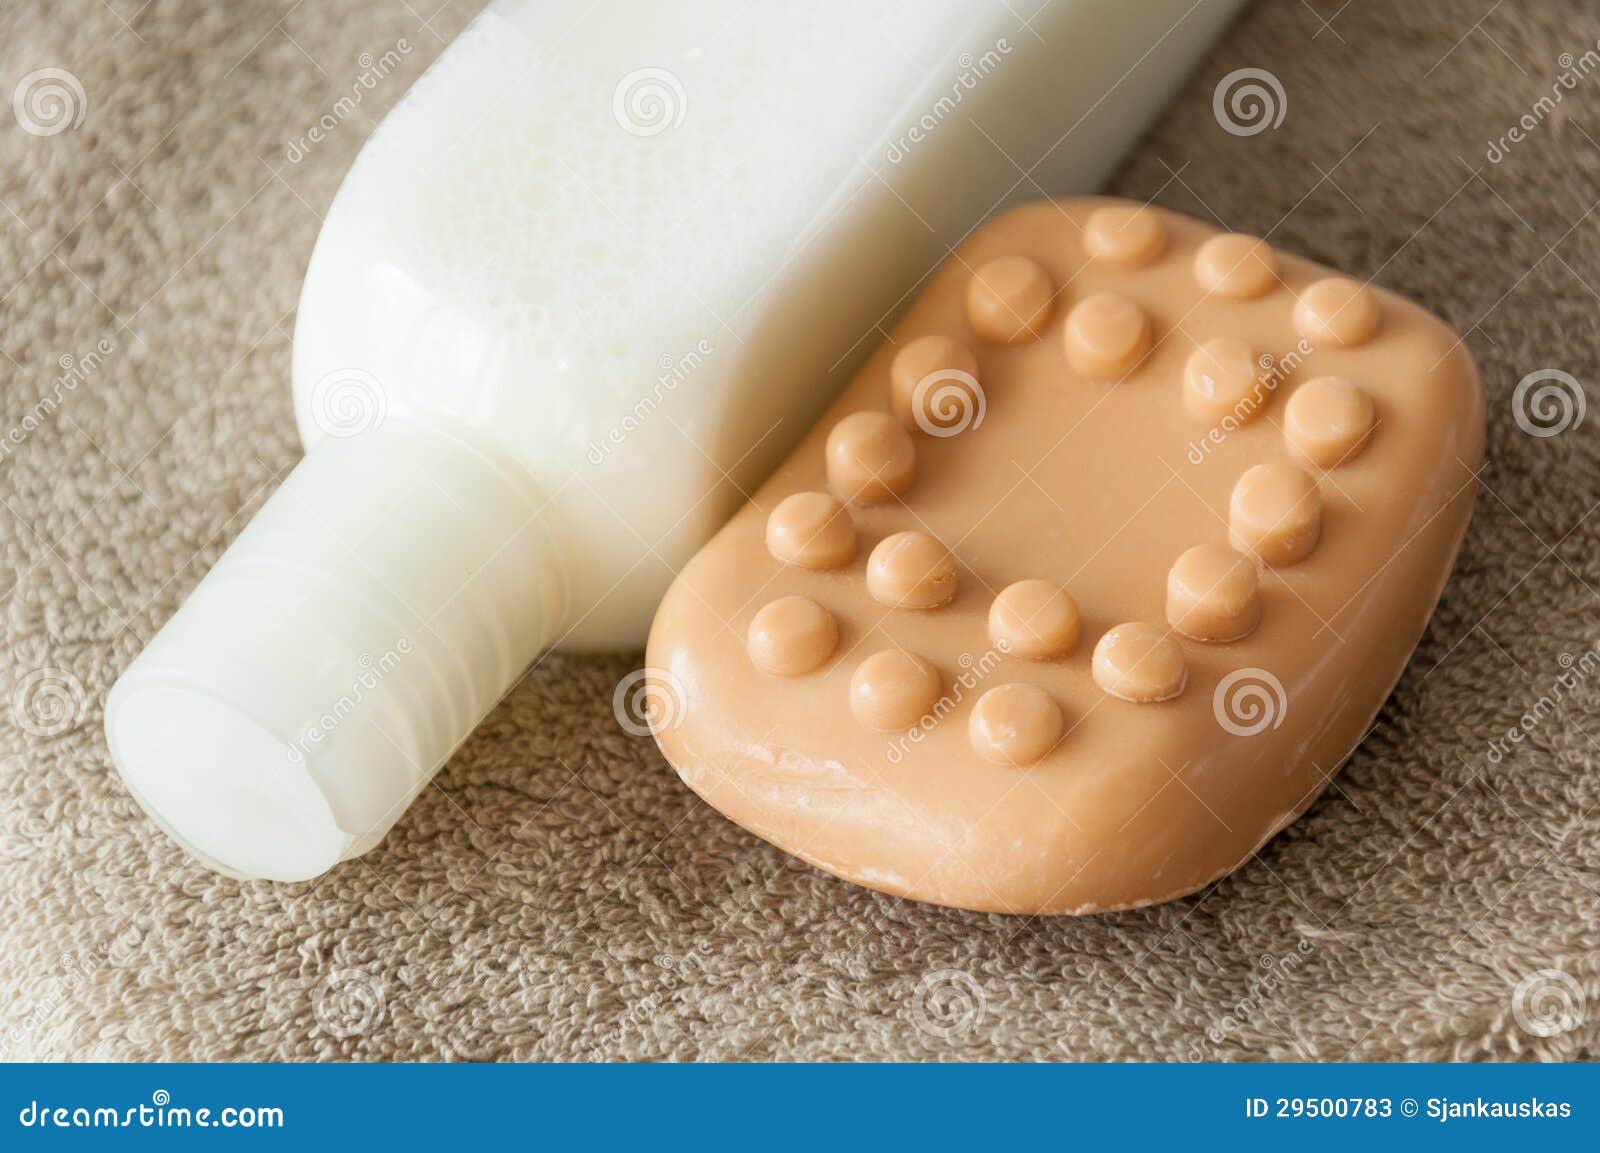 Massage Soap And Body Lotion Stock Image Image Of Shower Closeup